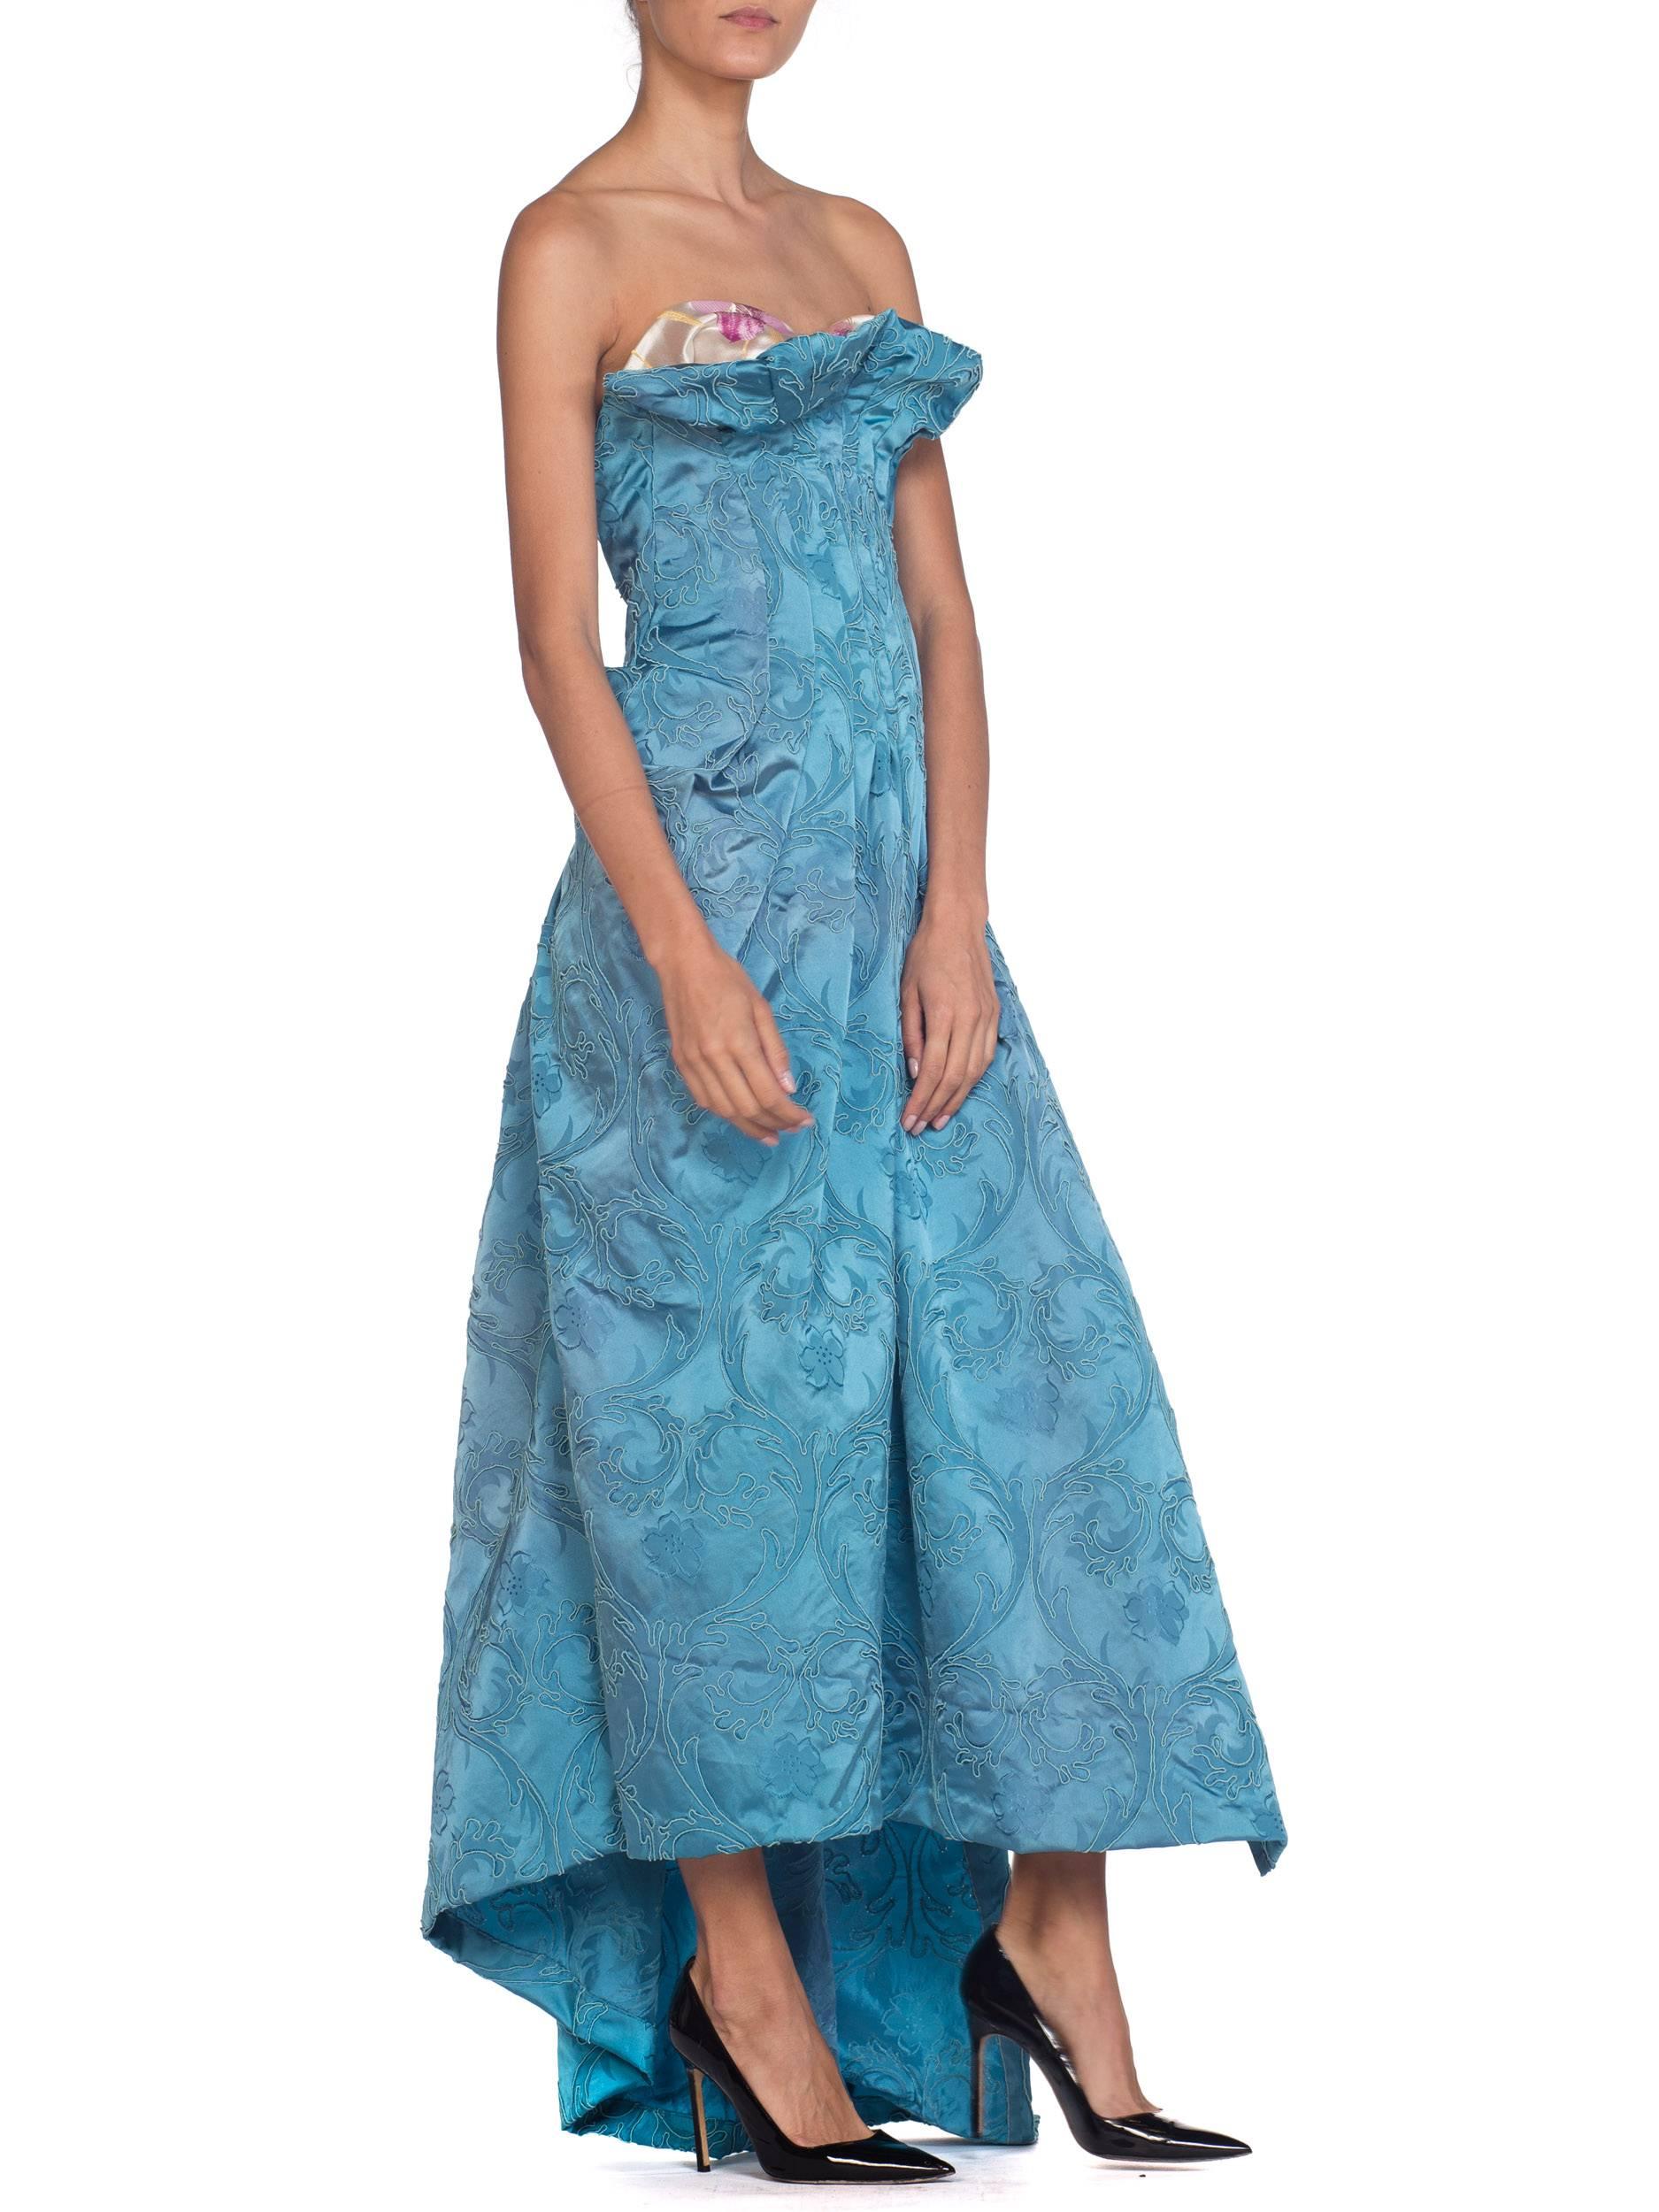 Women's Morphew Strapless Gown with Boning Made from 1950s Blue Satin Demask 